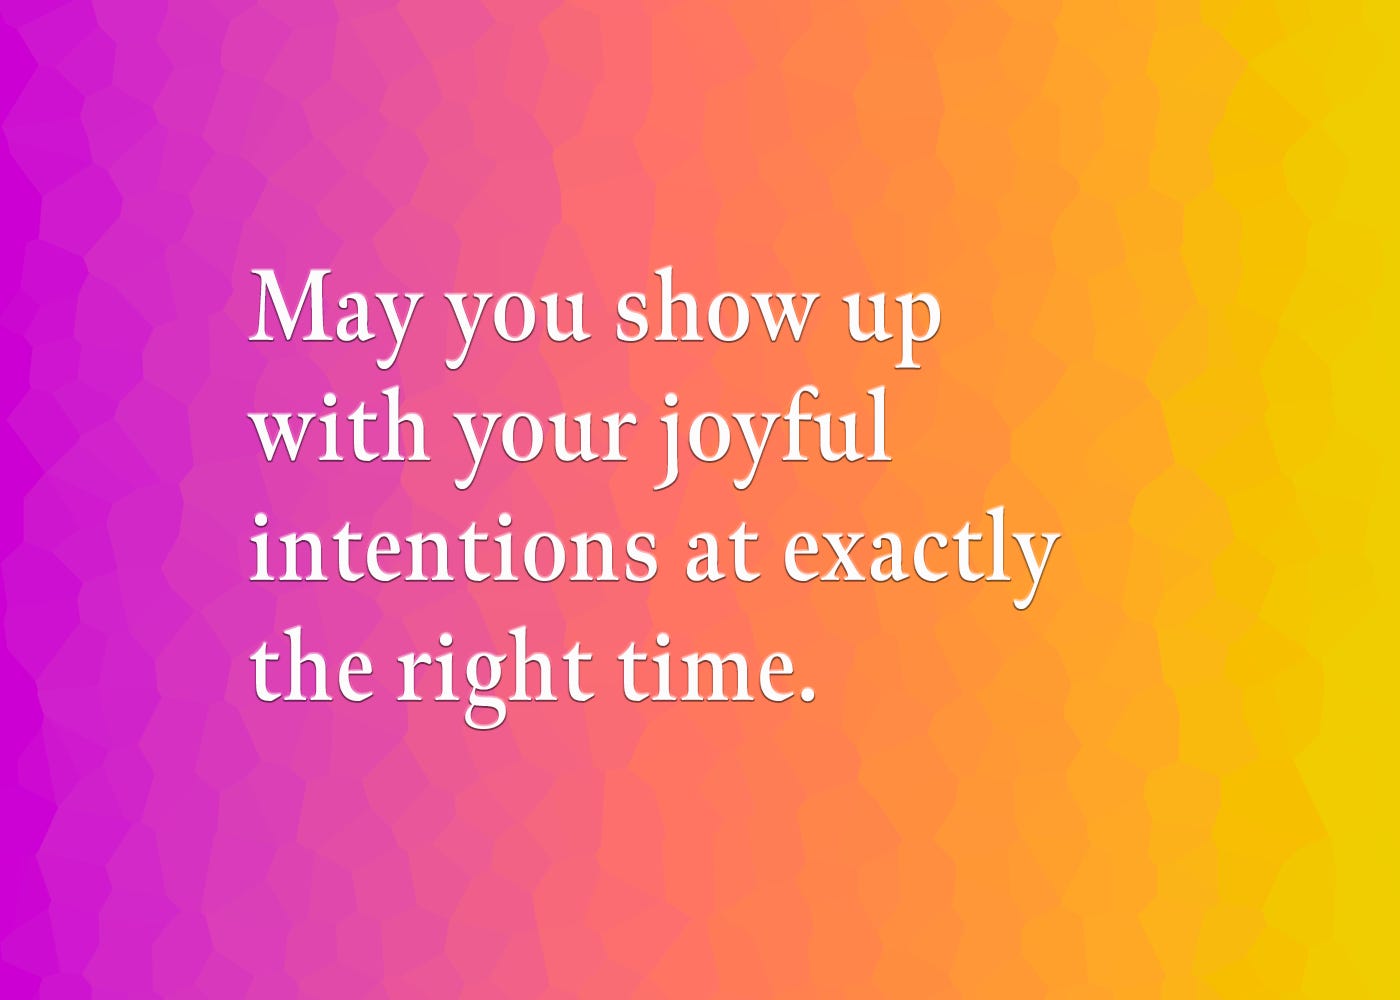 May you show up with your joyful intentions at exactly the right time